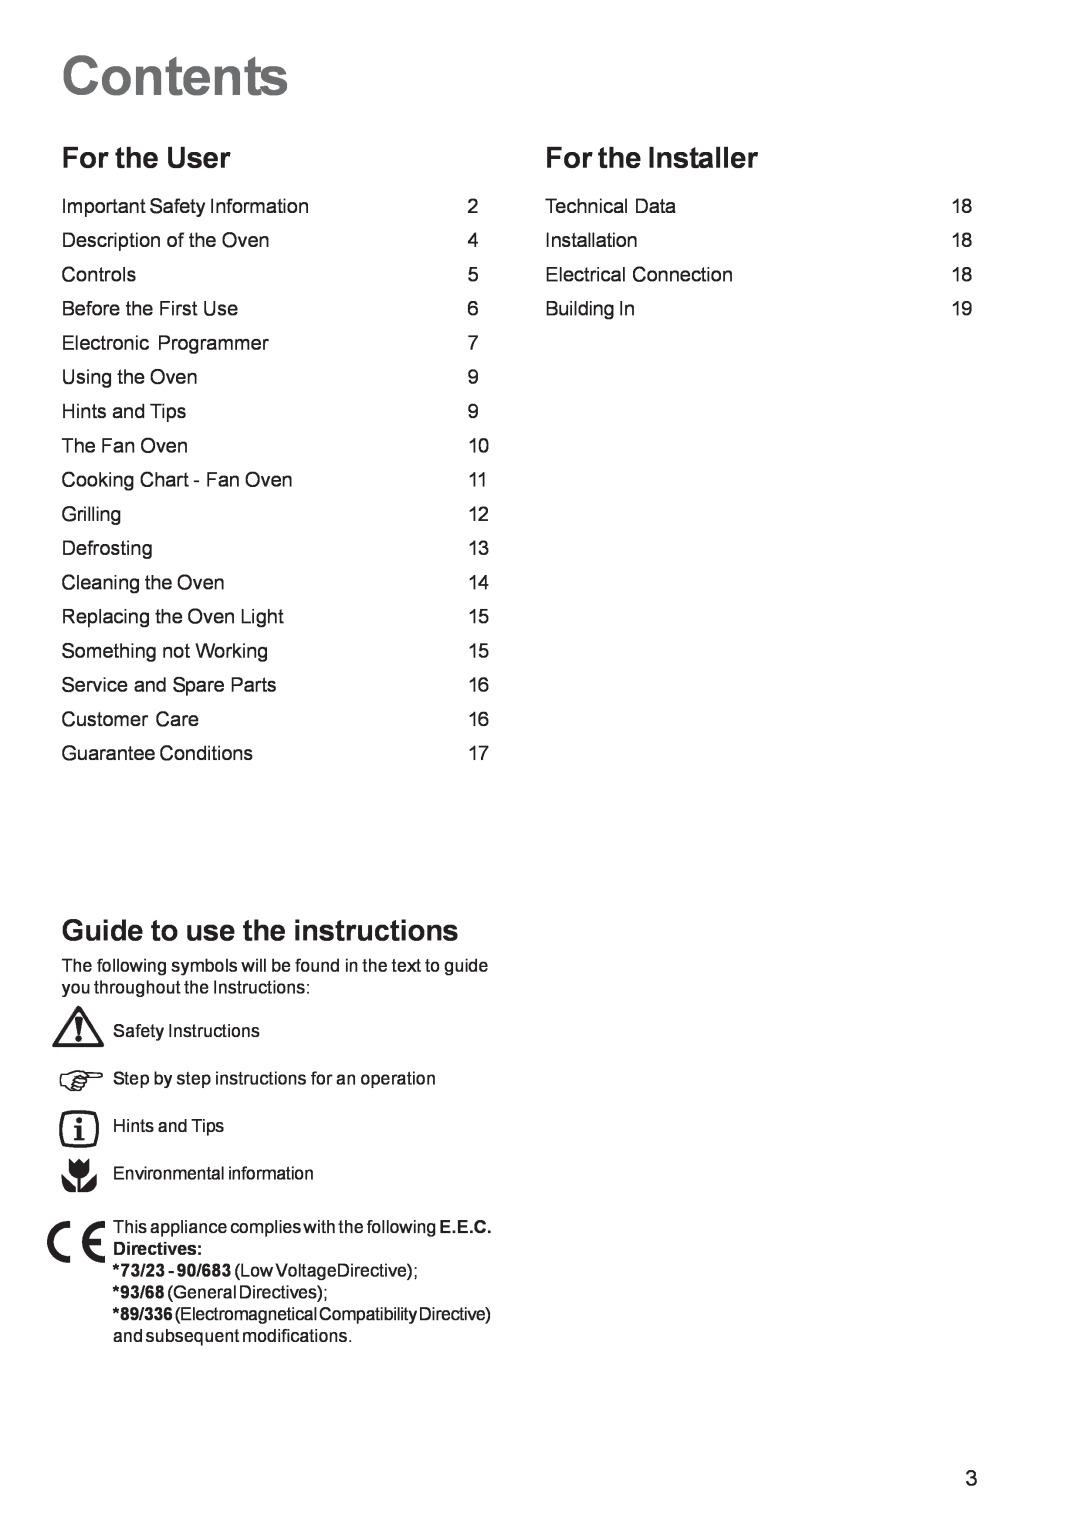 Zanussi ZBF 560 manual Contents, For the User, For the Installer, Guide to use the instructions 